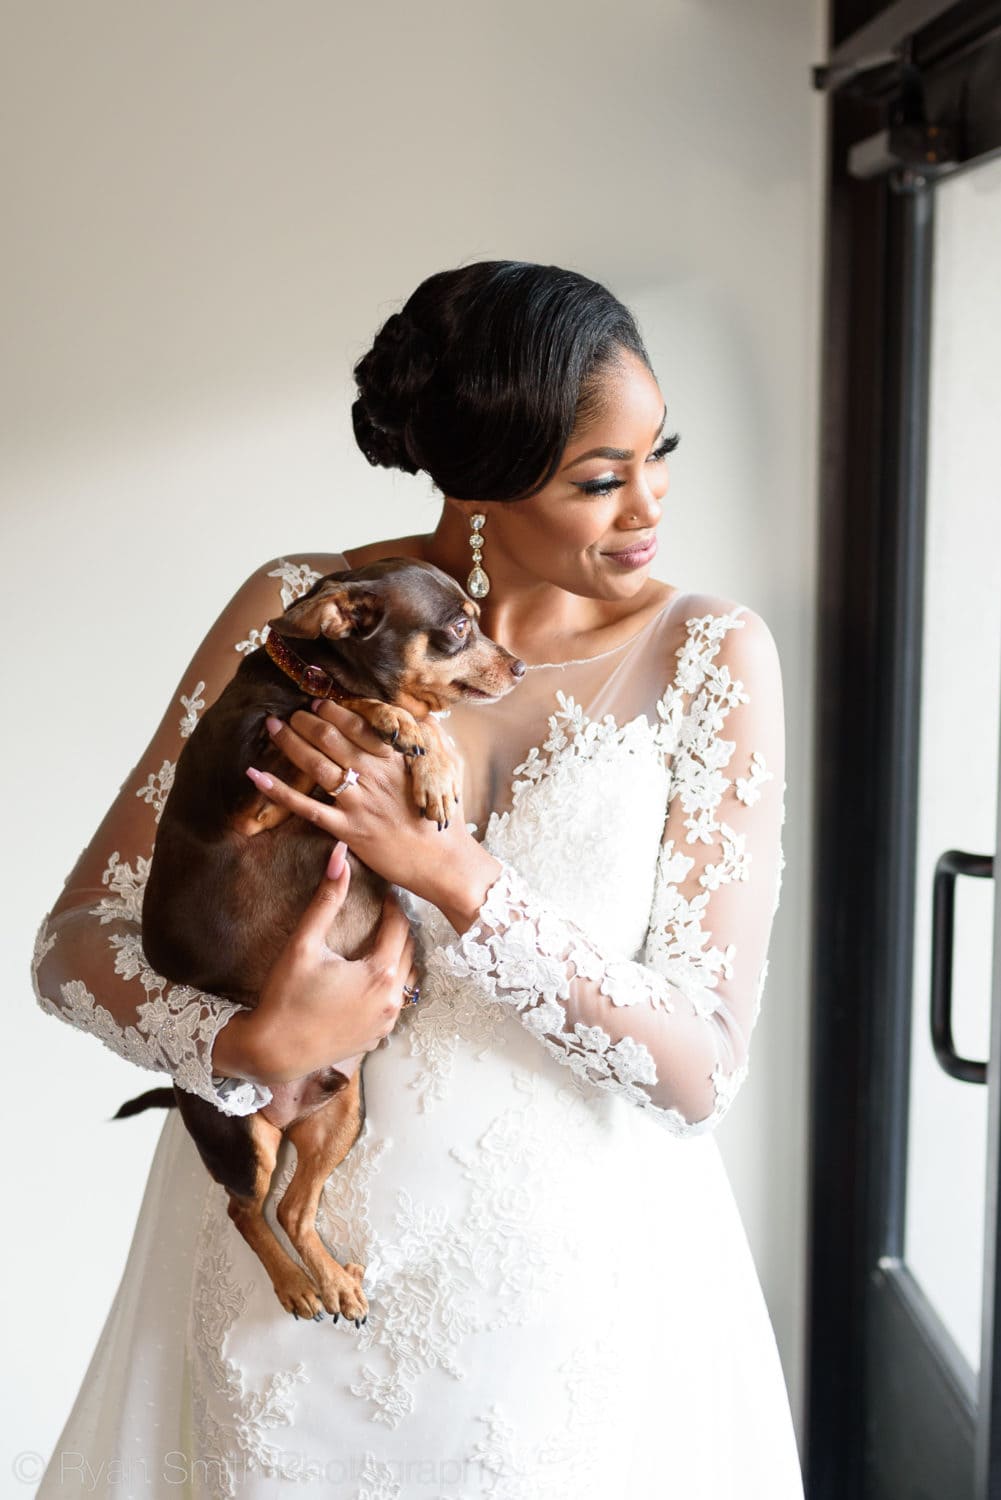 Bride and puppy looking out the window - Doubletree Resort by Hilton Myrtle Beach